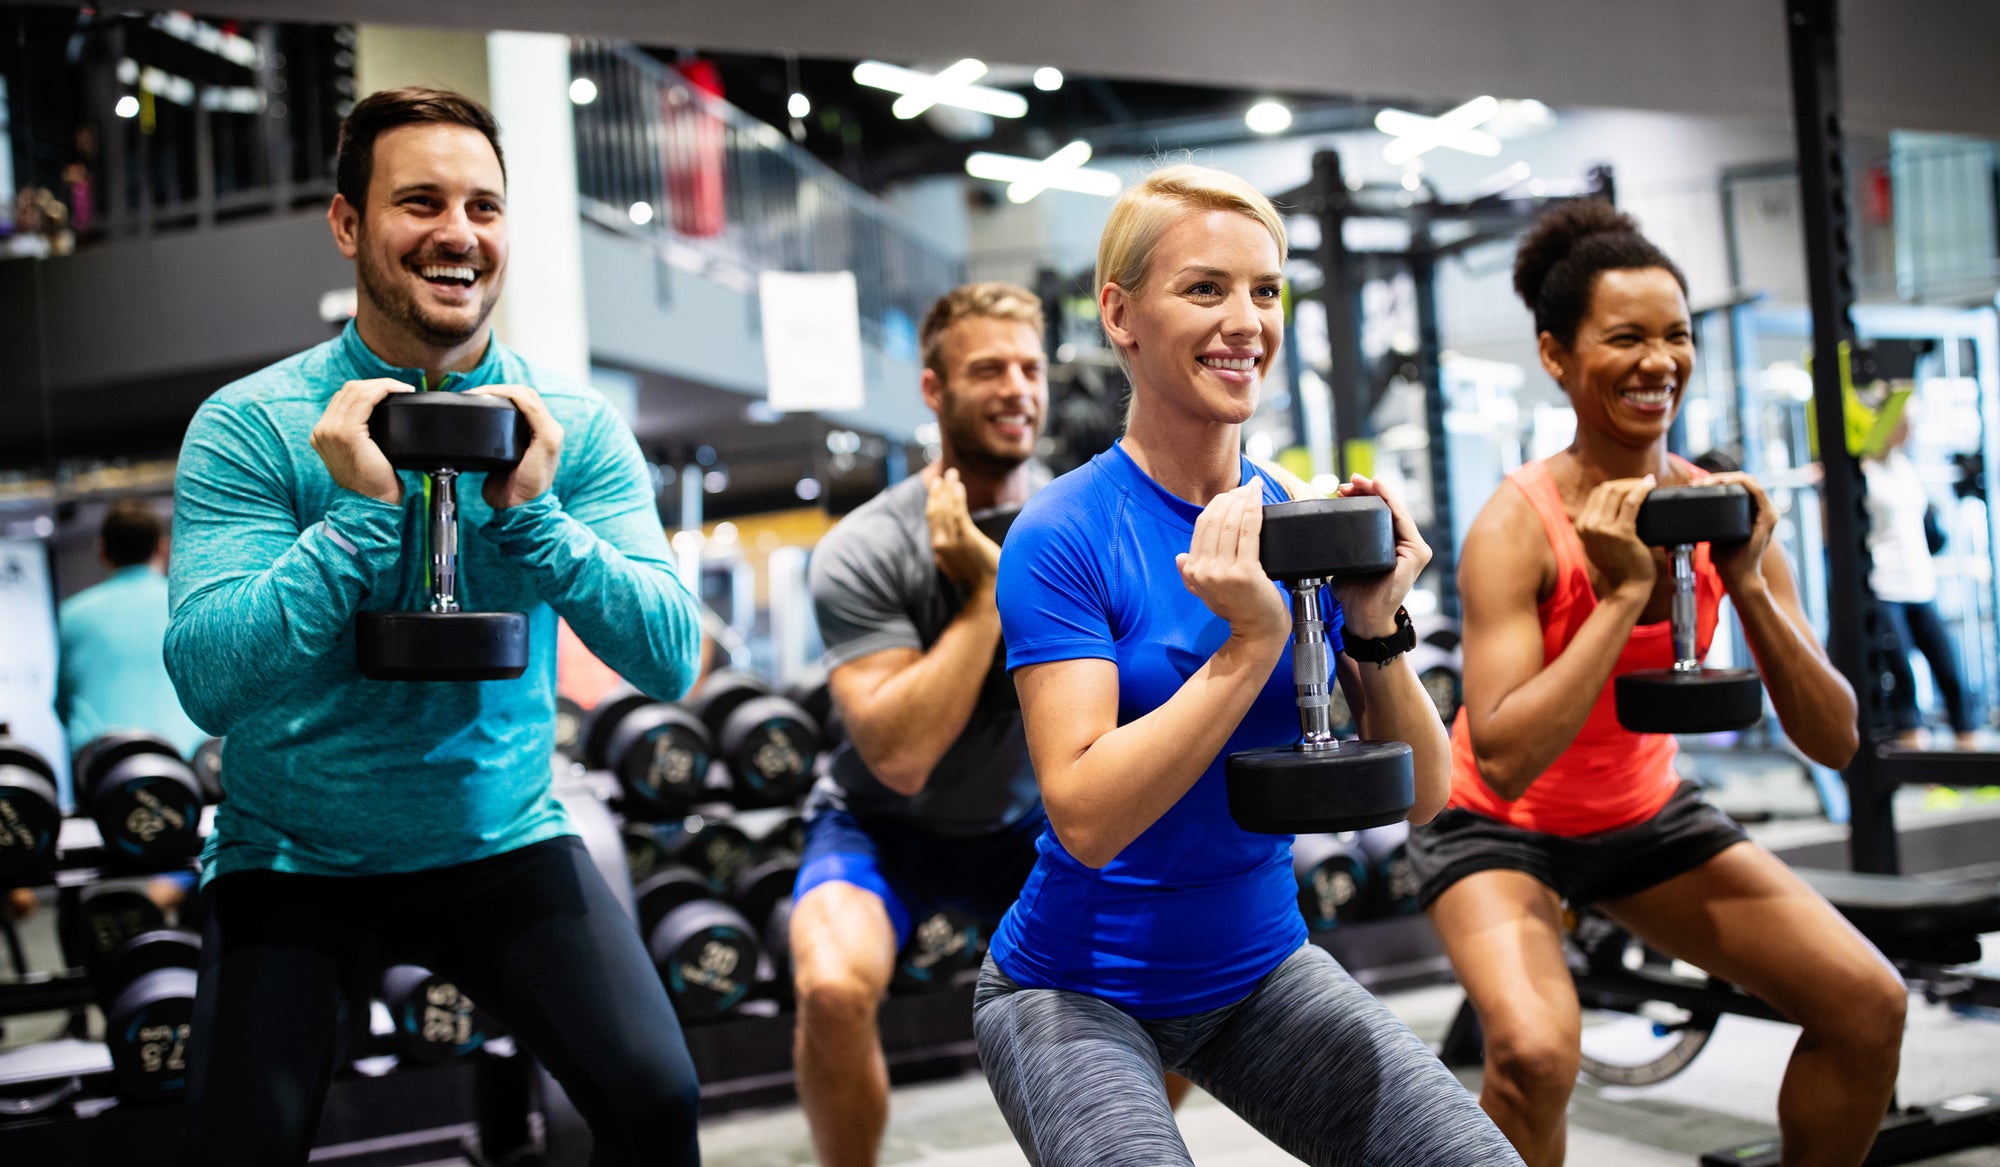 Searches for 'gym membership' hit its highest point in U.S. internet history